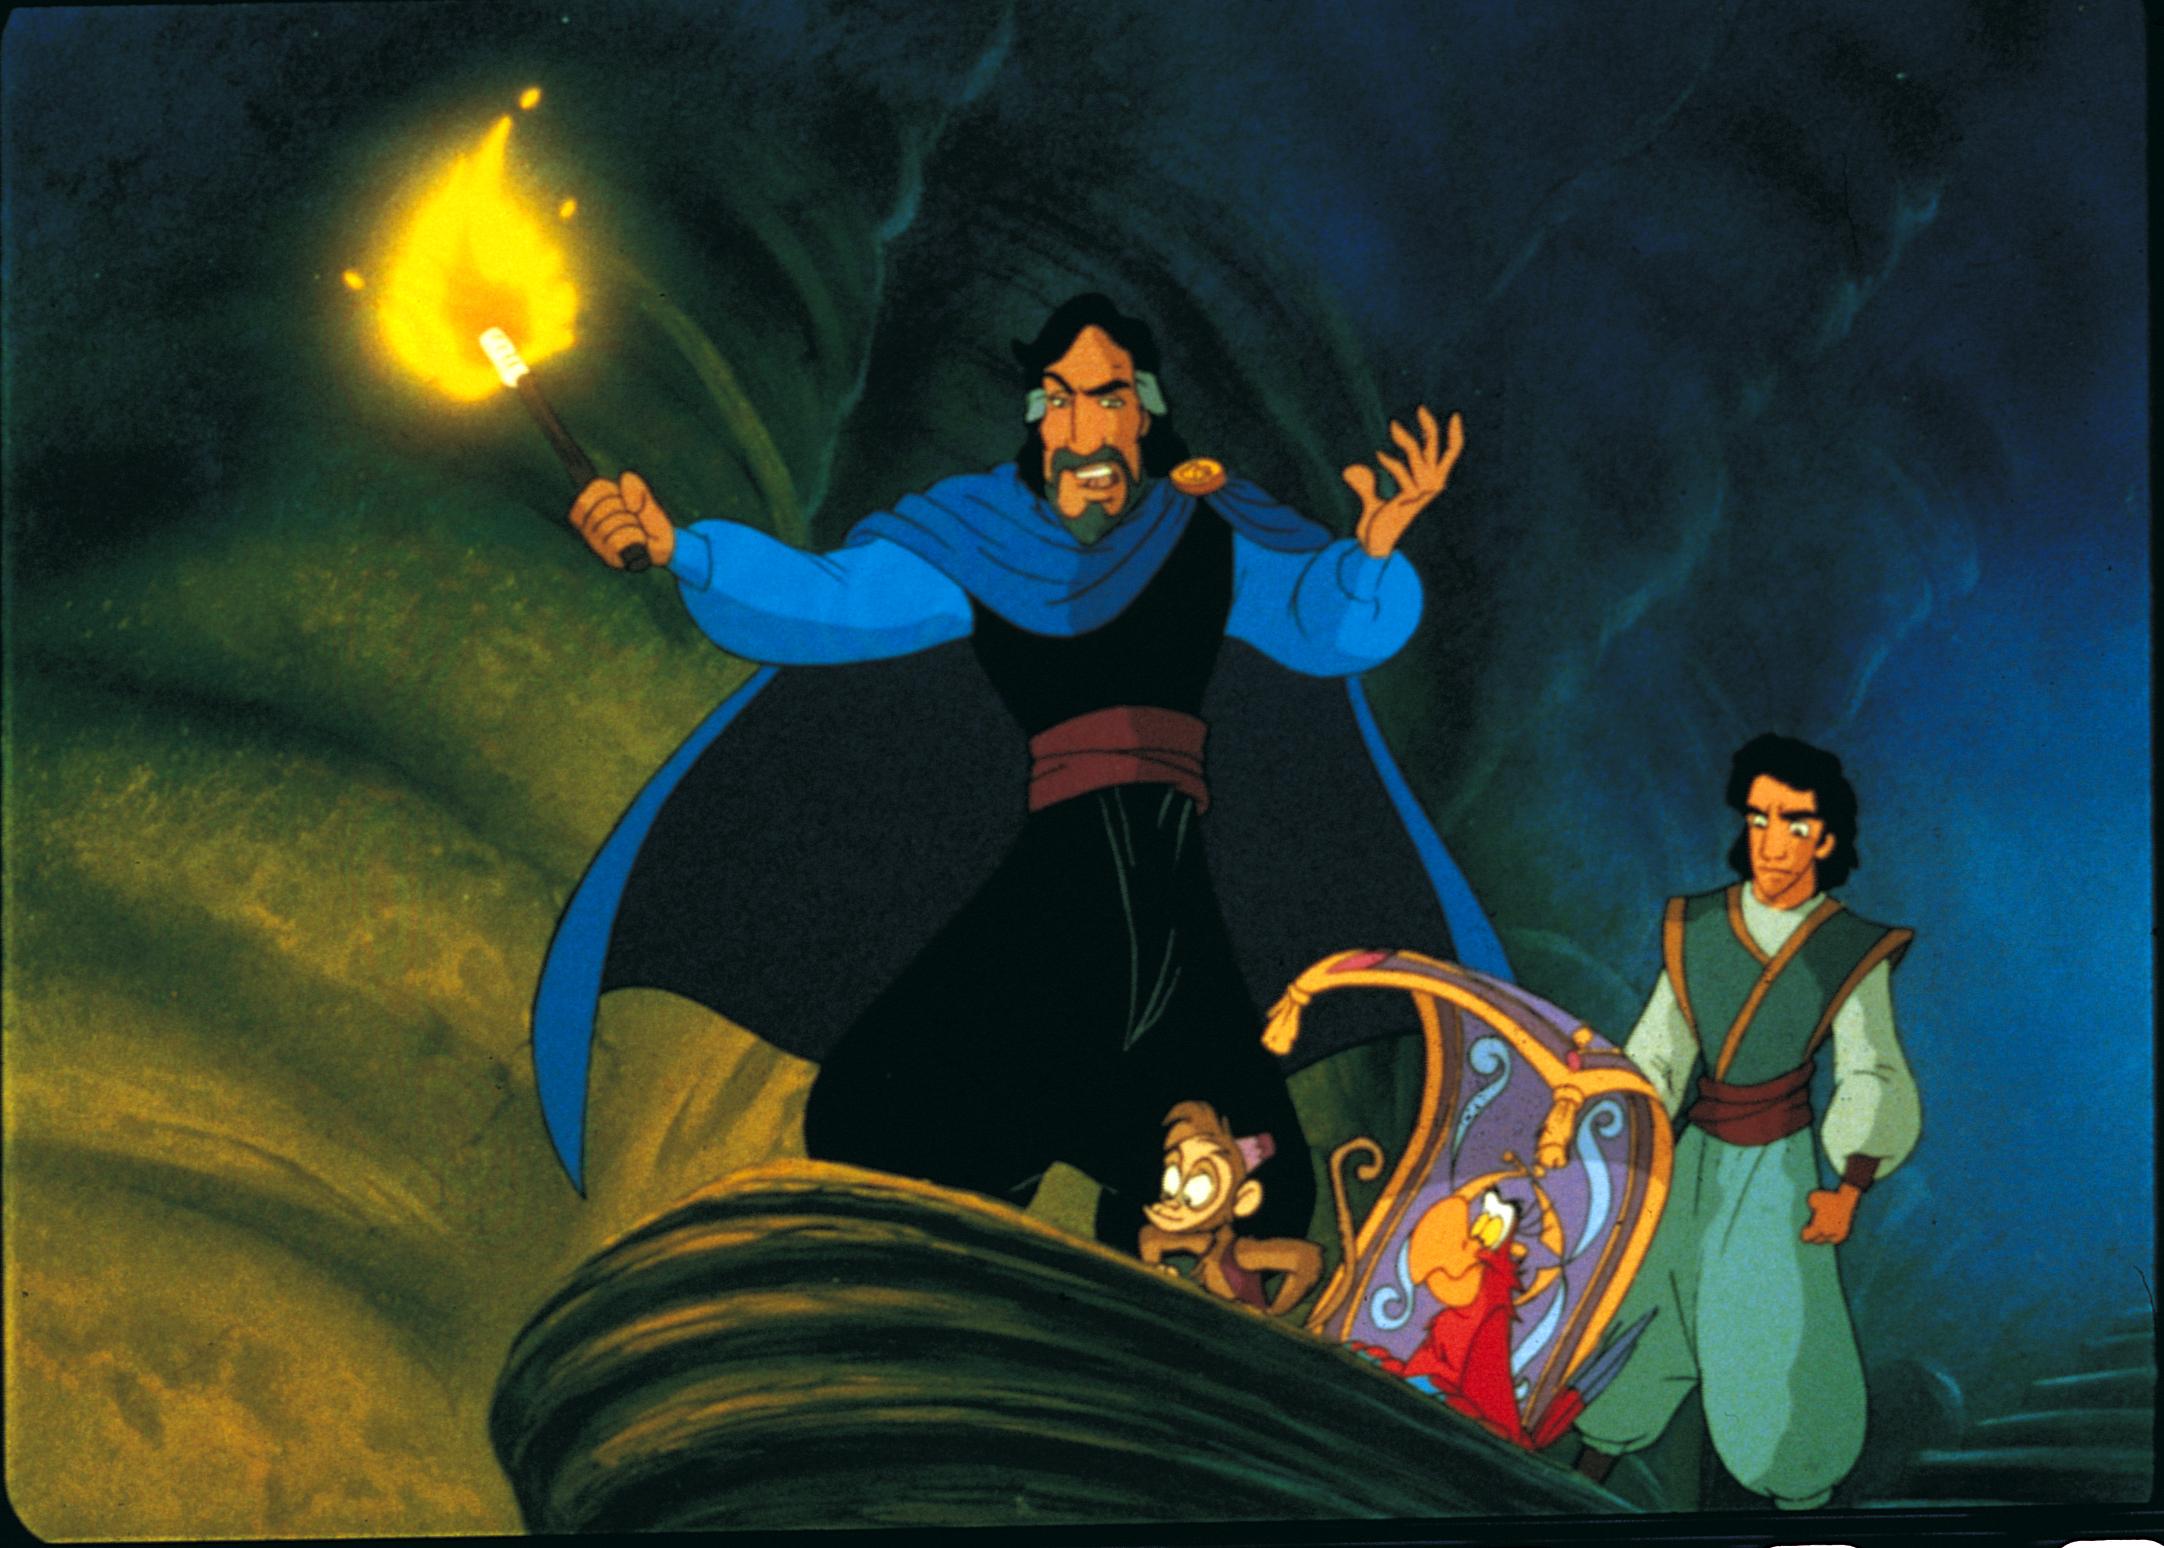 aladdin-and-the-king-of-thieves_7159e394.jpg